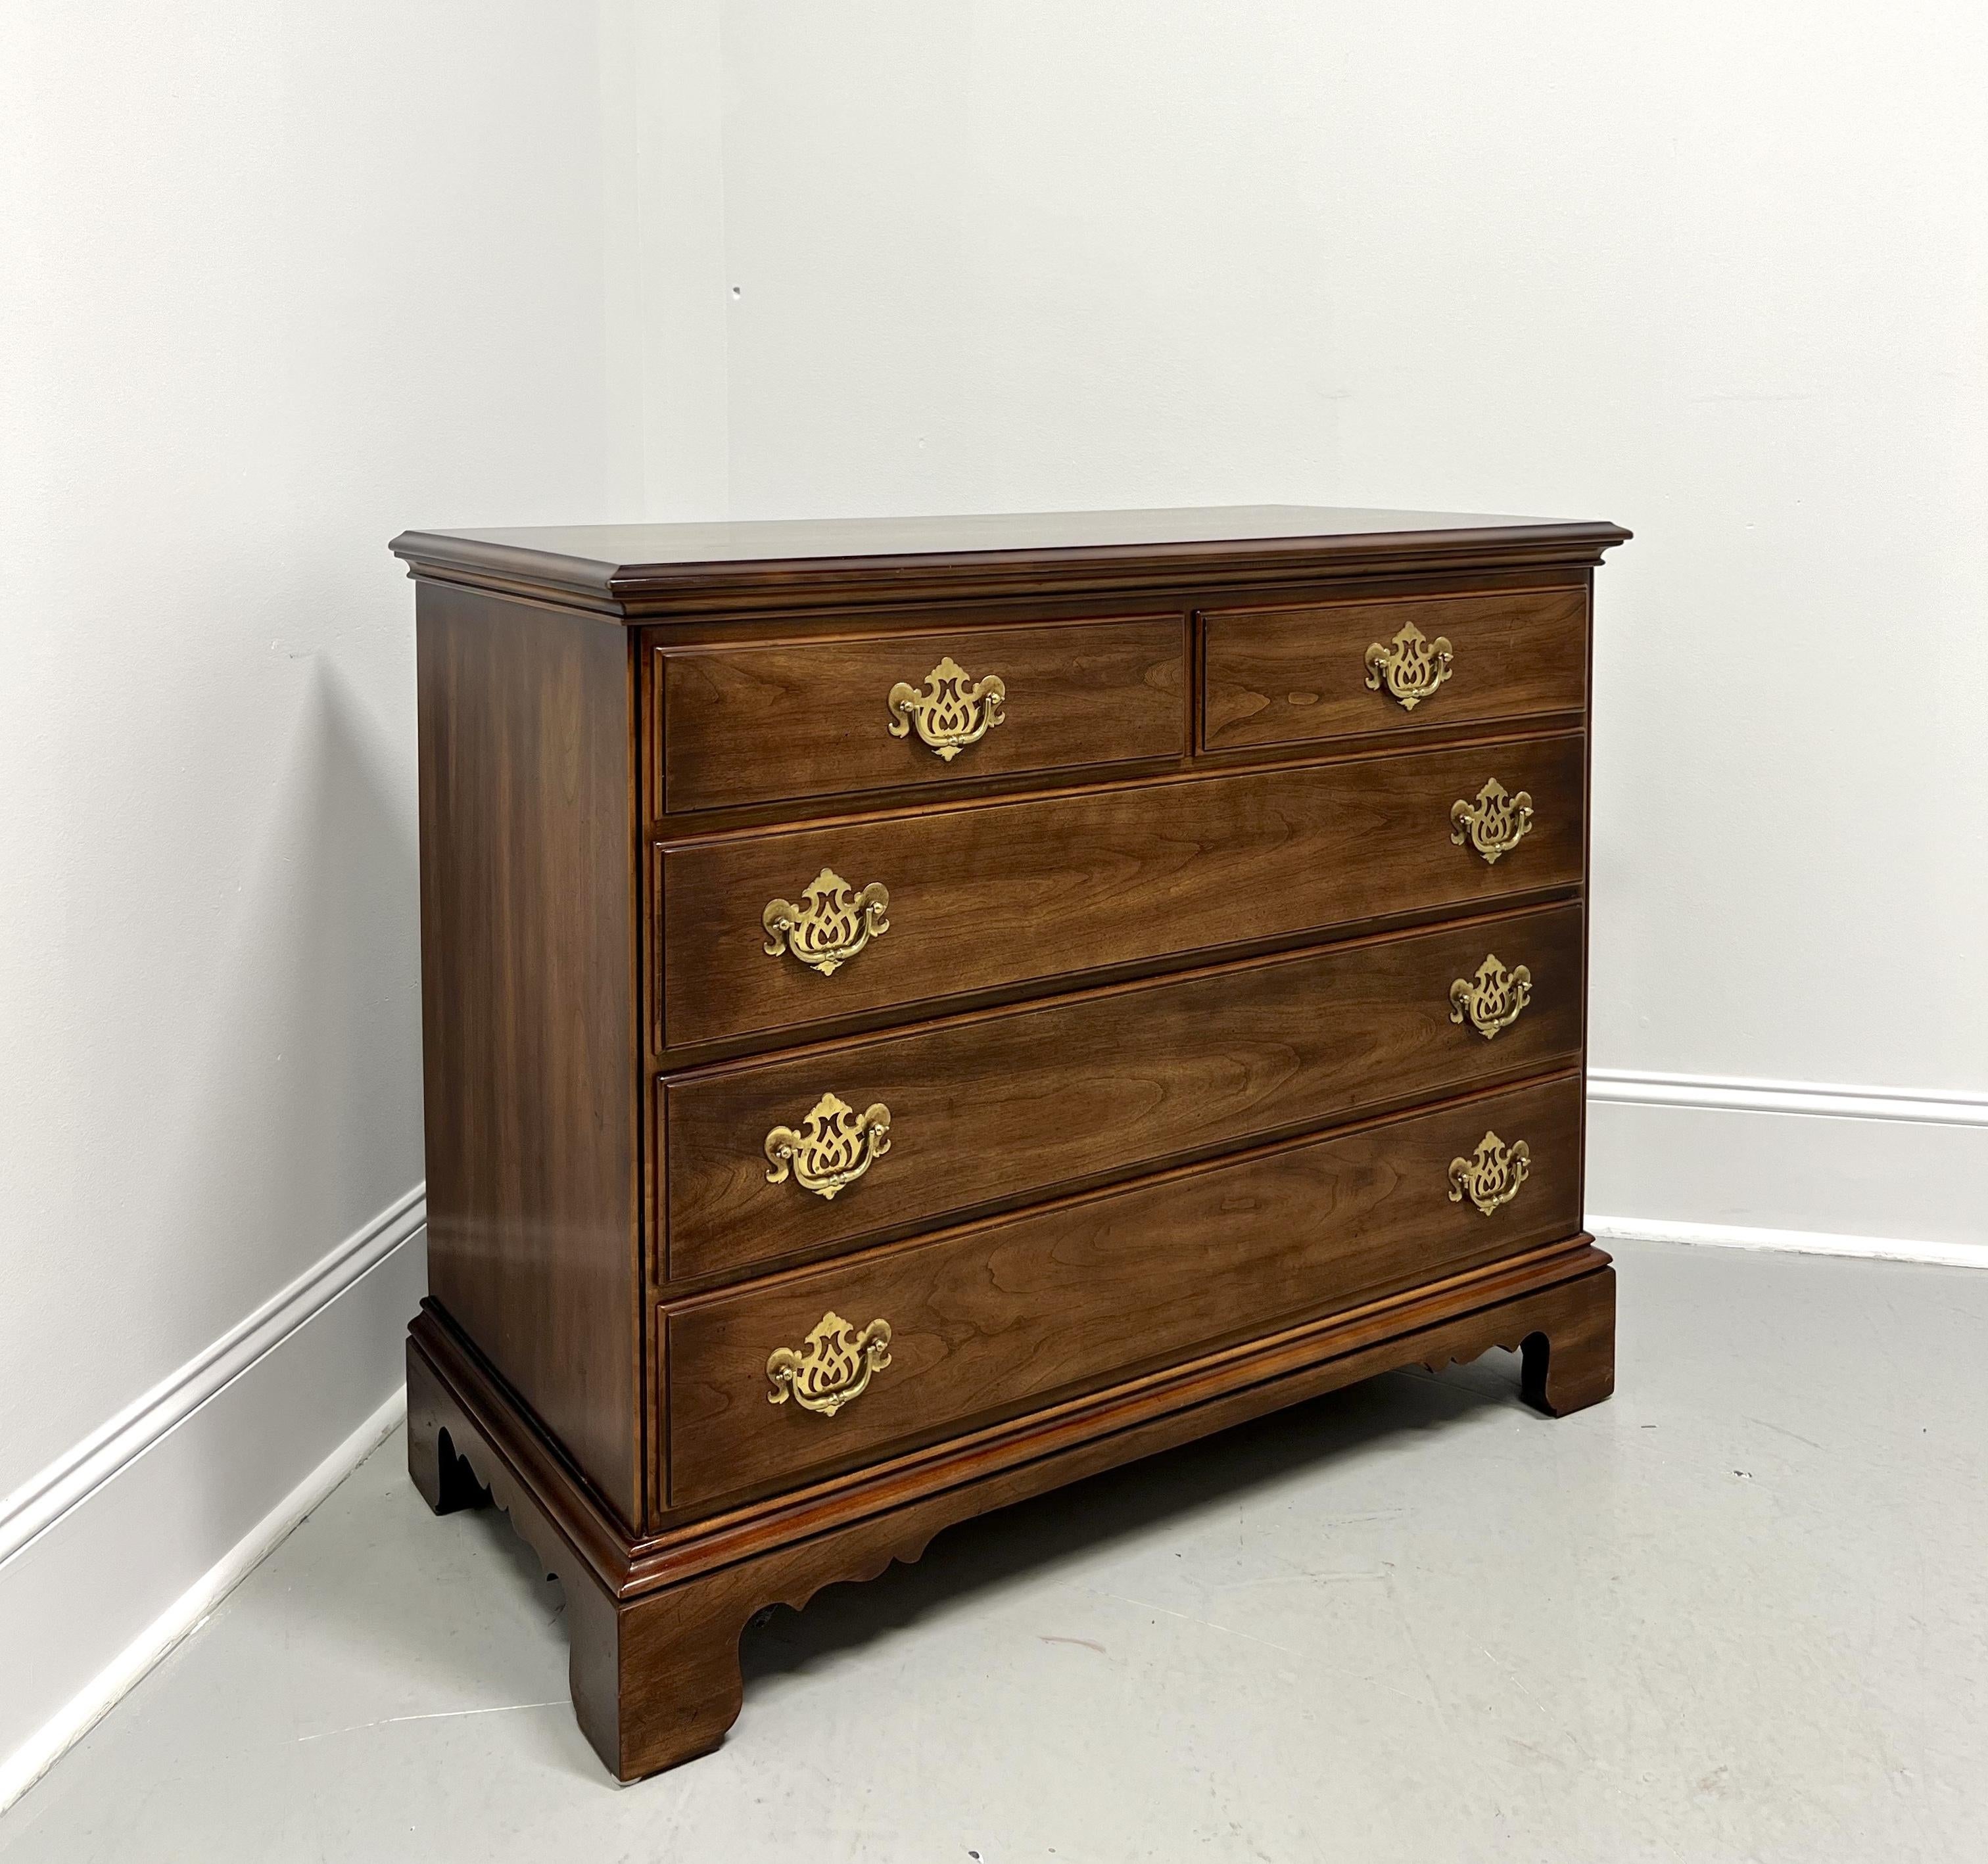 STATTON Trutype Americana Oxford Cherry Chippendale Bachelor Chest For Sale 7